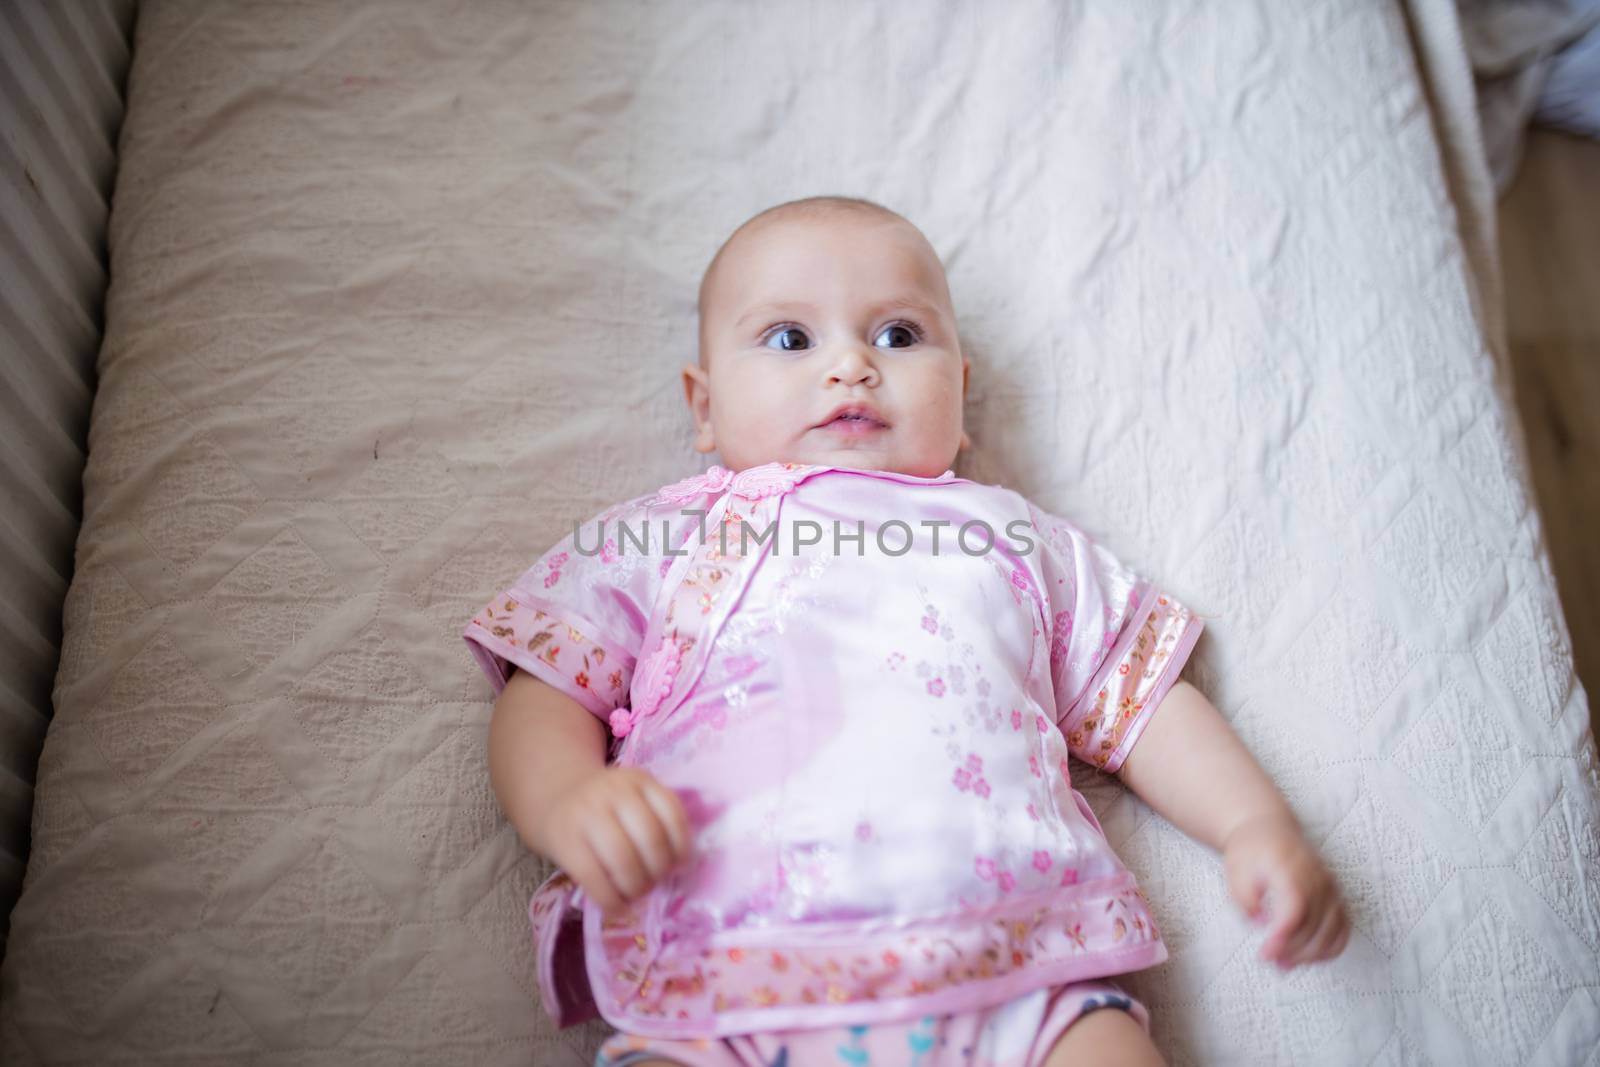 Curious adorable baby girl from above in Asian pink attire lying down on white bed. Portrait of cute female baby resting on bed. Happy babies on cradles and beds